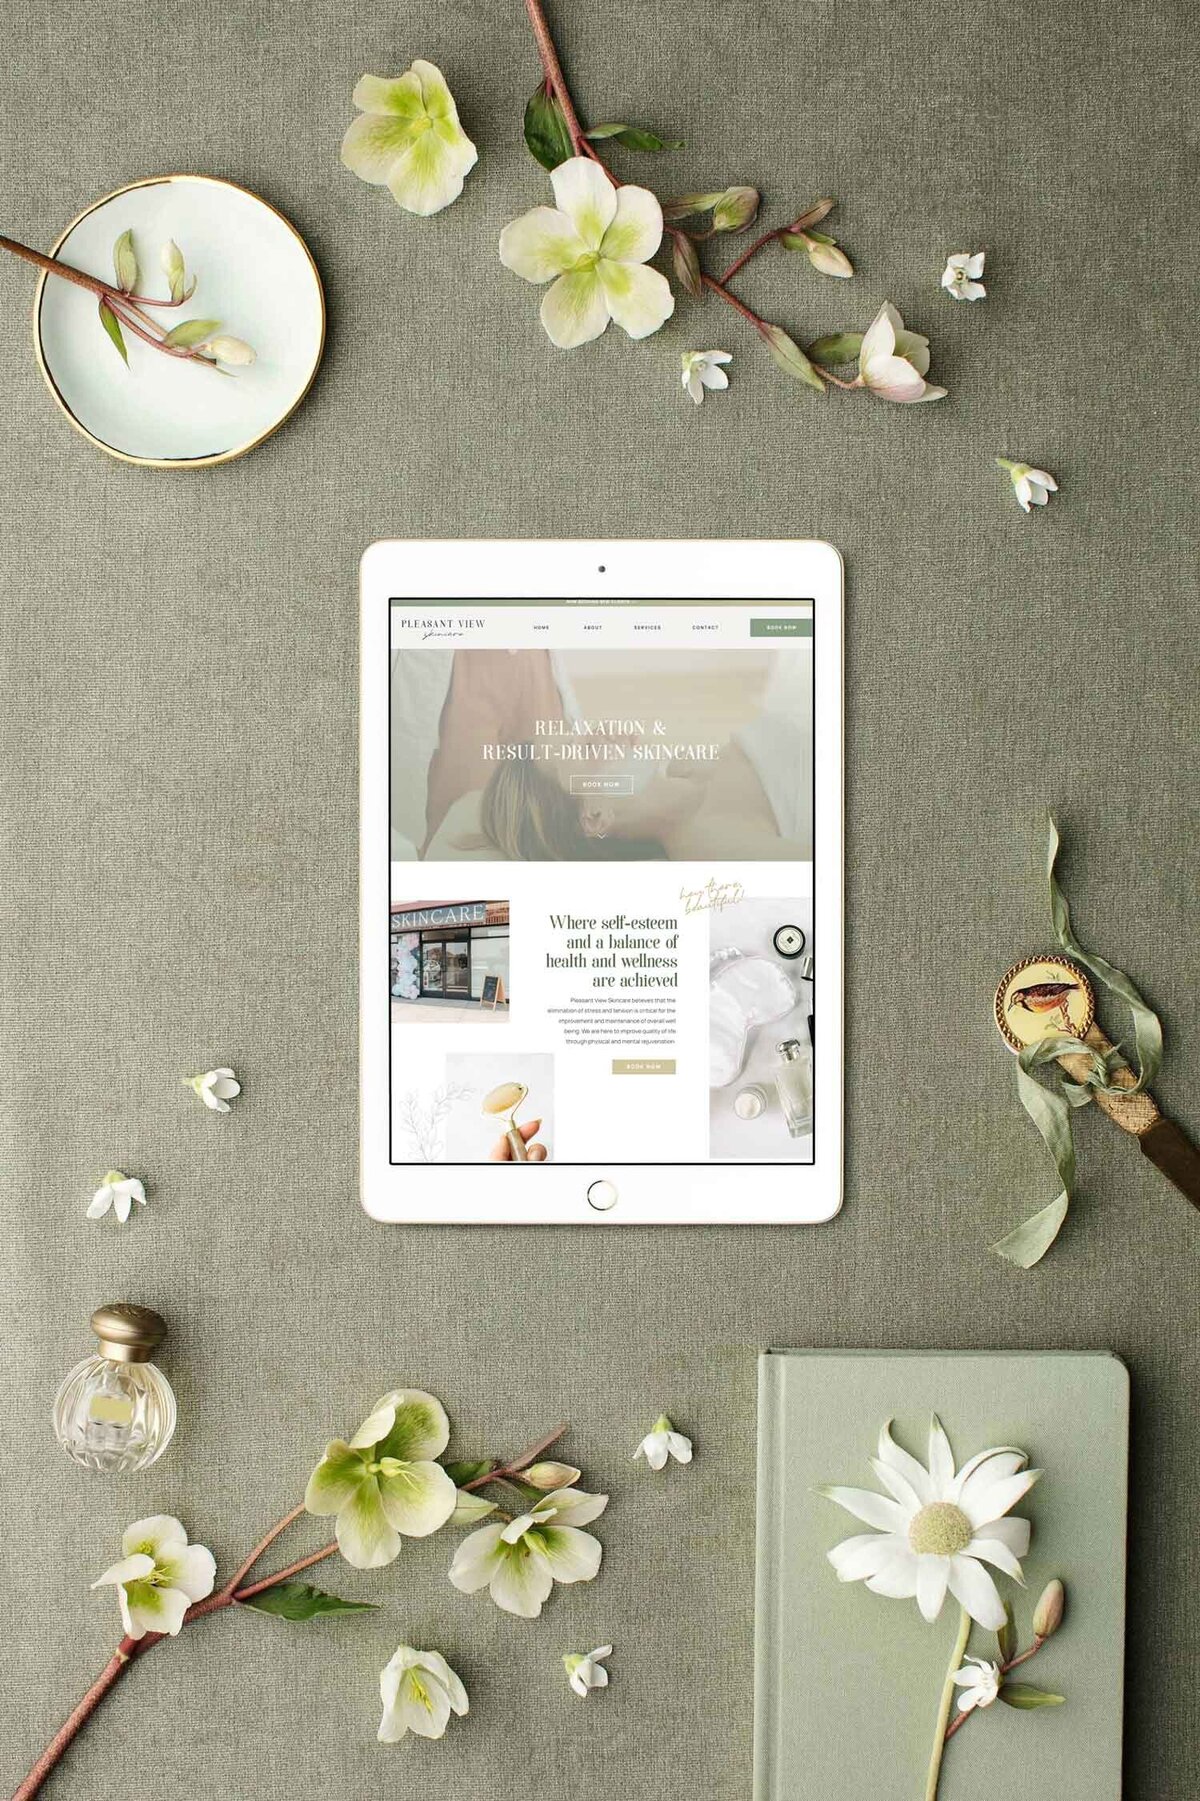 Step into a world of calm hues and delicate details with a salon website displayed on an iPad, showcasing the soothing atmosphere of custom web design.